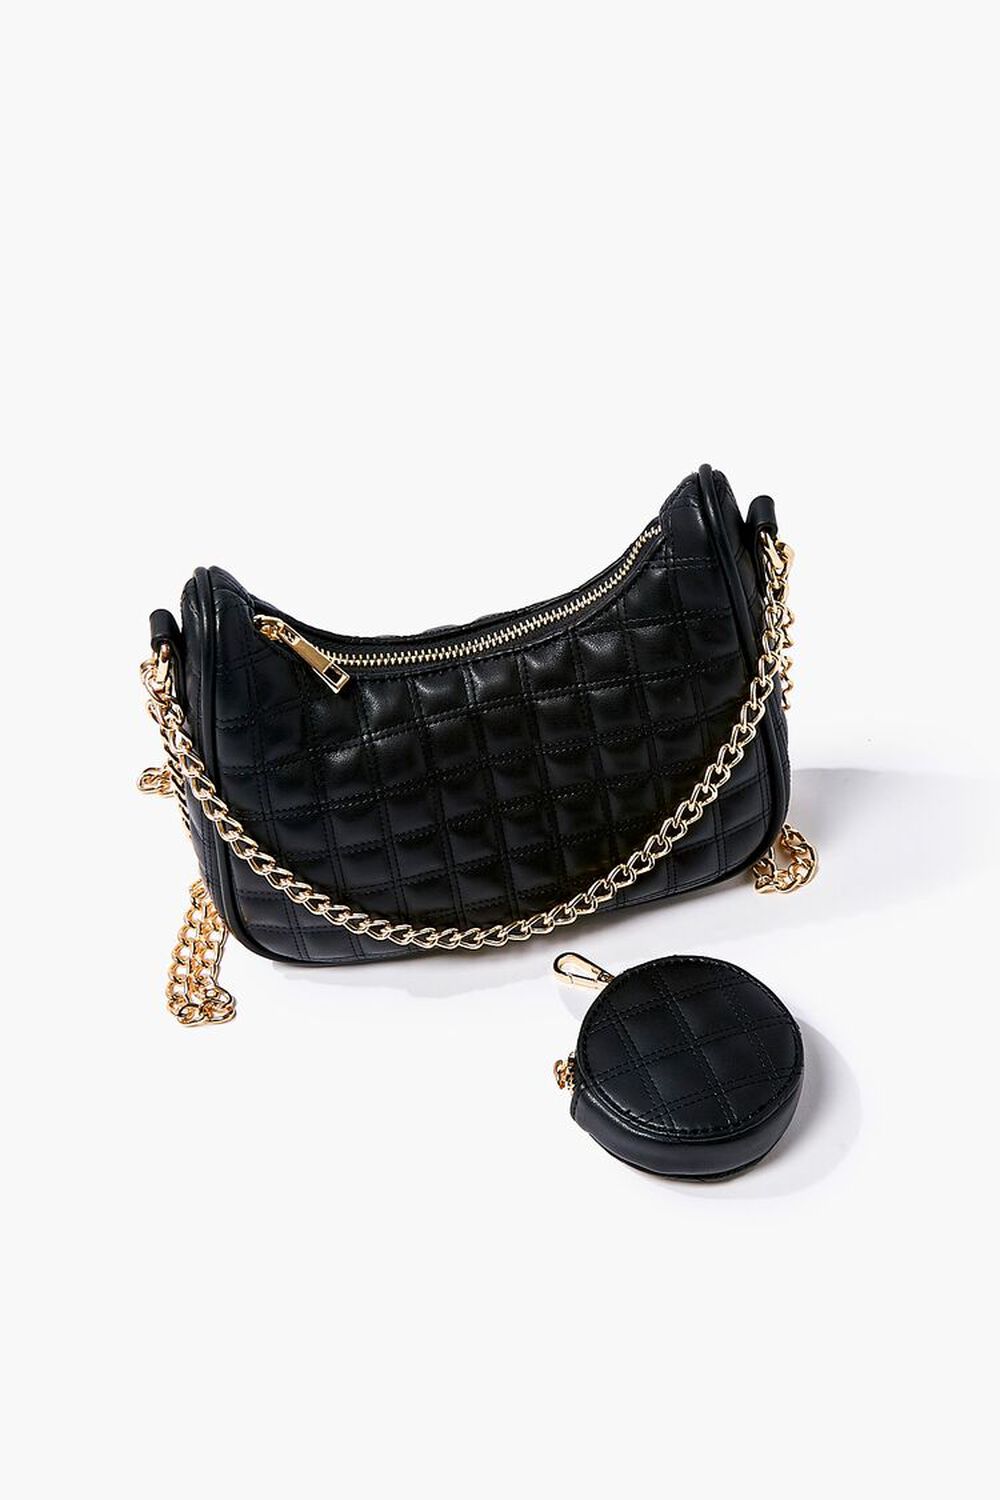 BLACK Quilted Chain-Strap Bag, image 1